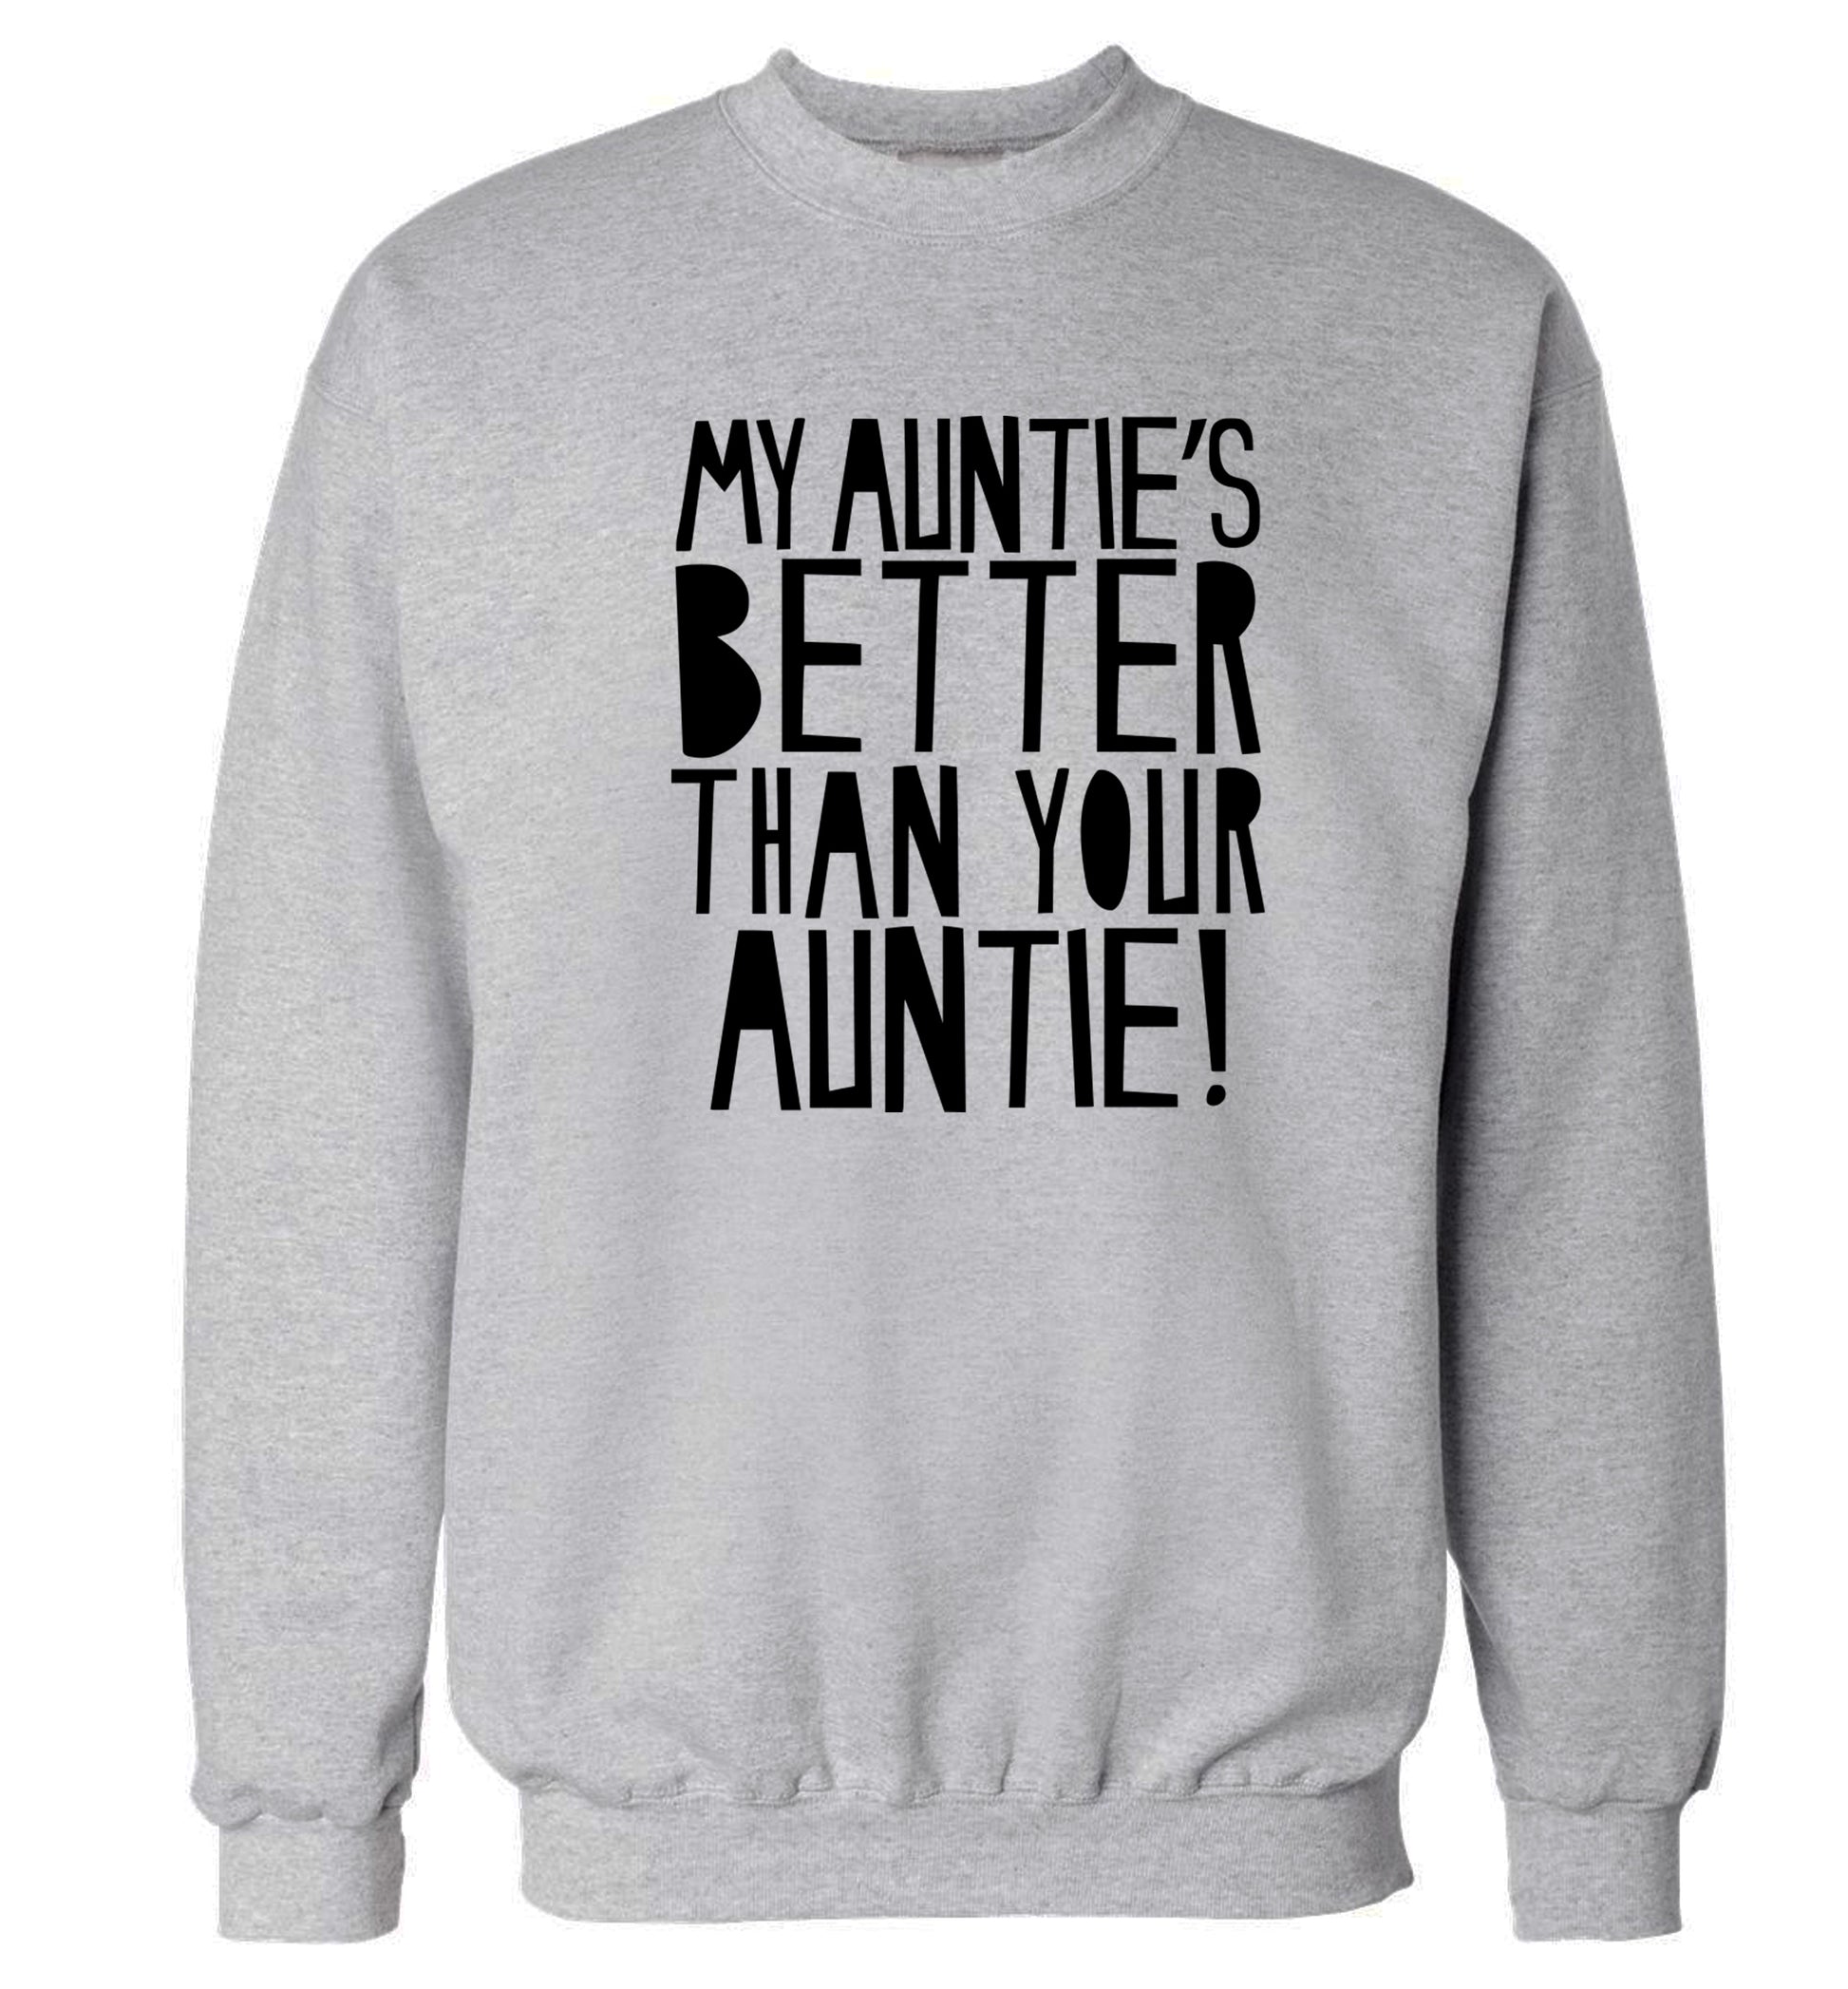 My auntie's better than your auntie Adult's unisex grey Sweater 2XL